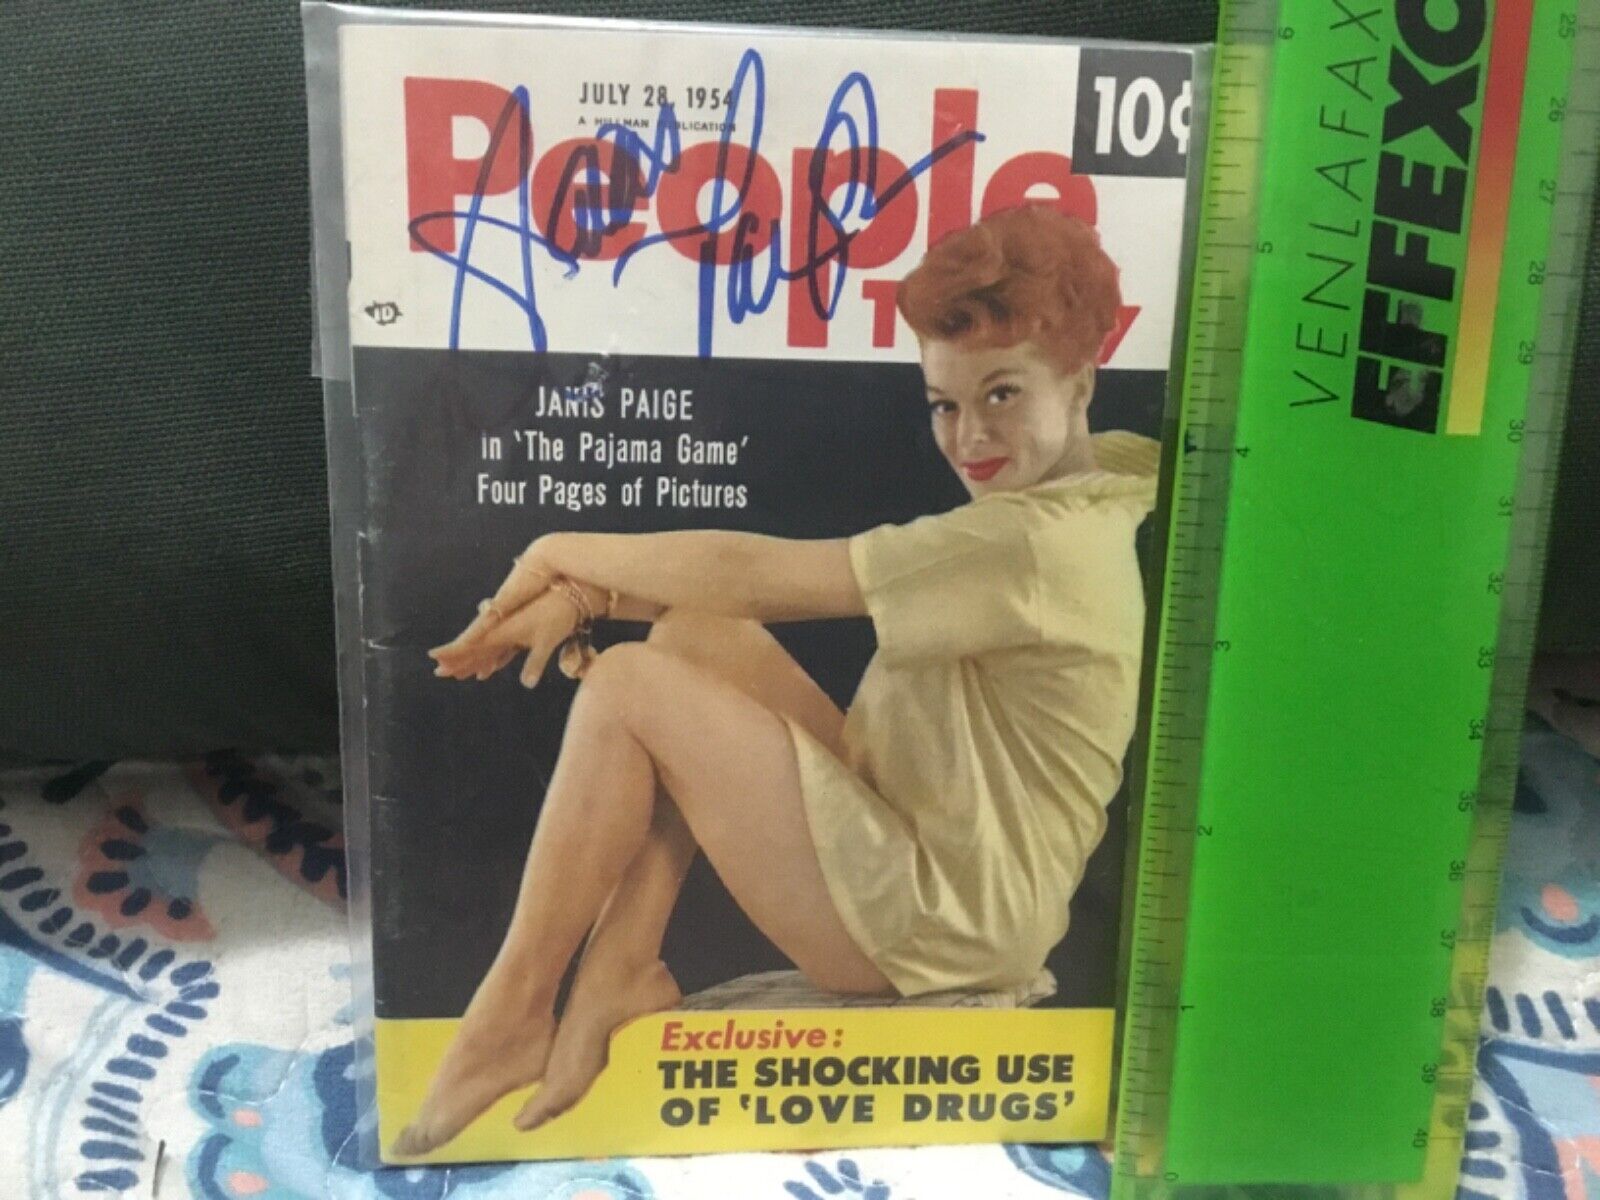 JANIS PAIGE SIGNED JULY  28,1954 PEOPLE MAGAZINE/BOOKLET-THE PAJAMA GAME